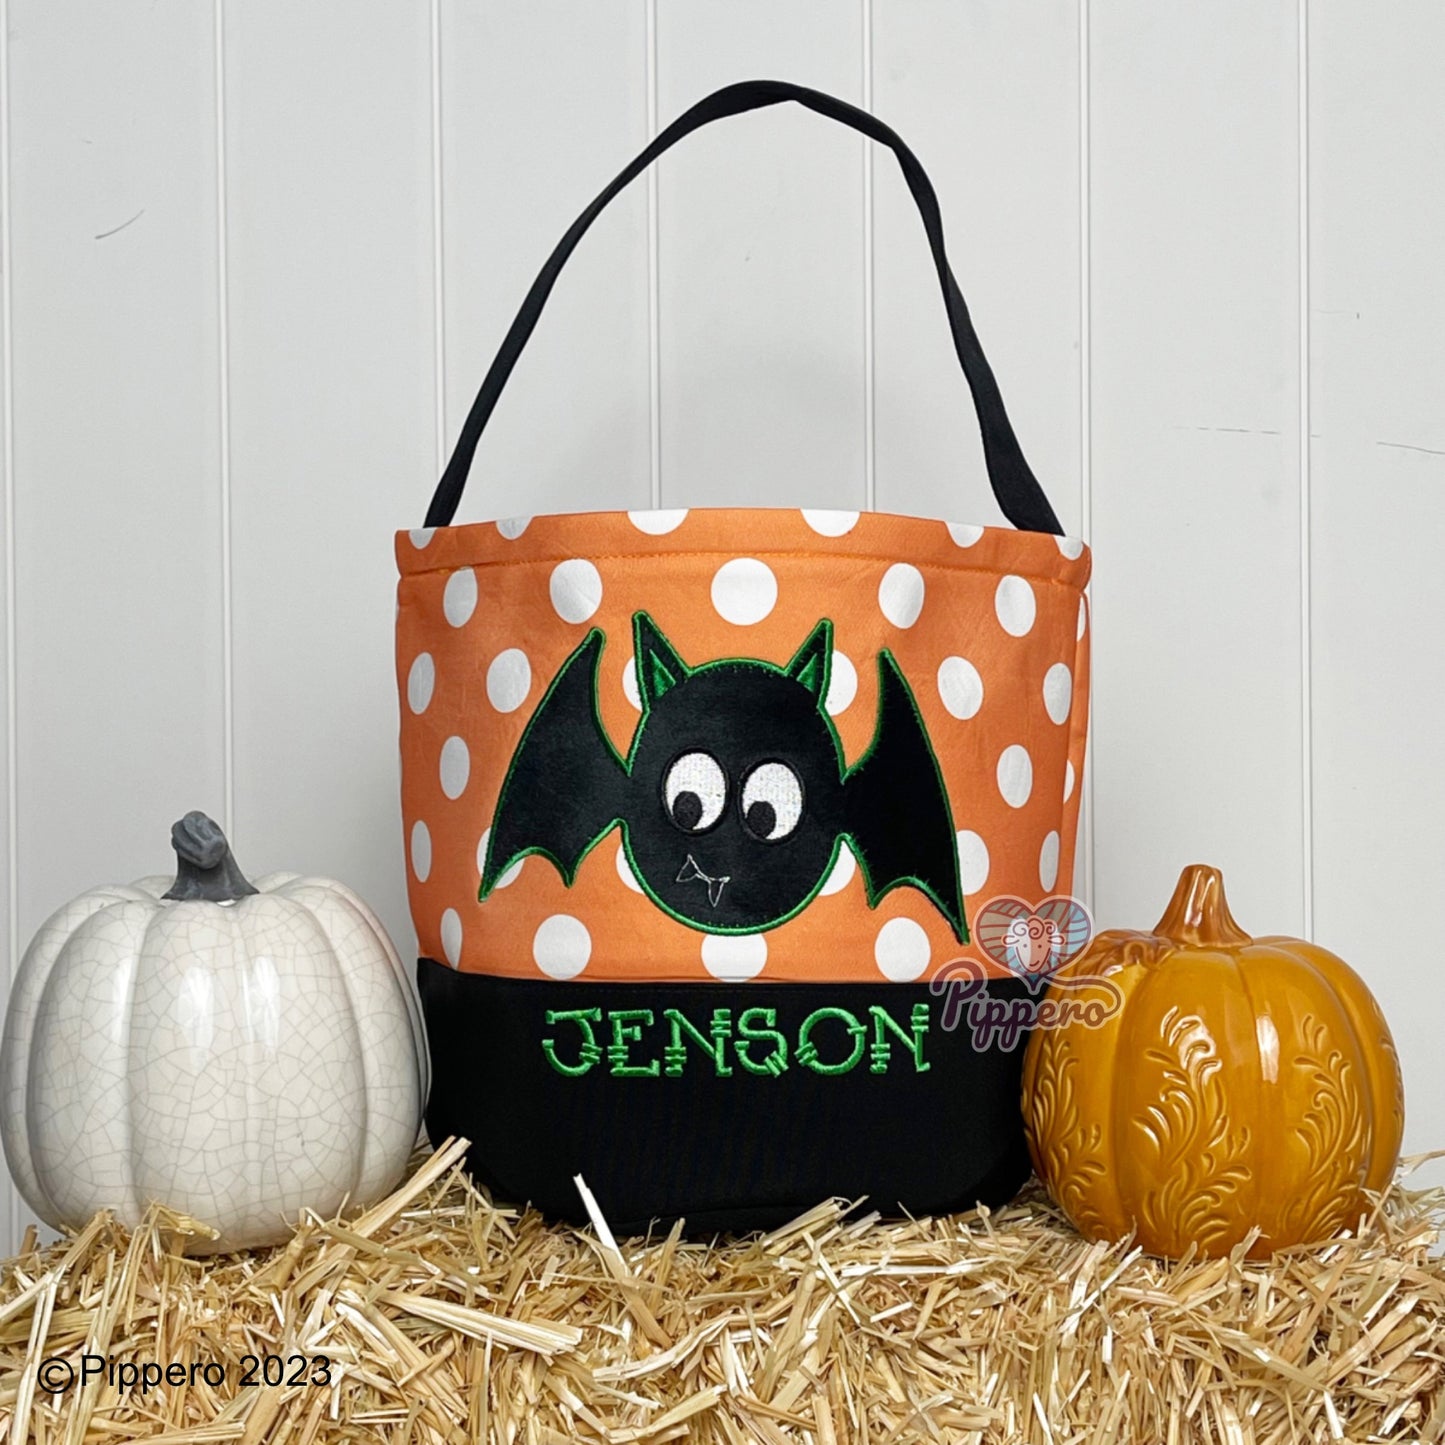 Personalized Custom Embroidered Large Dot Appliqué Character Trick or Treat Halloween Bag Basket Bucket Tote Kid’s Gift for Boy or Girl